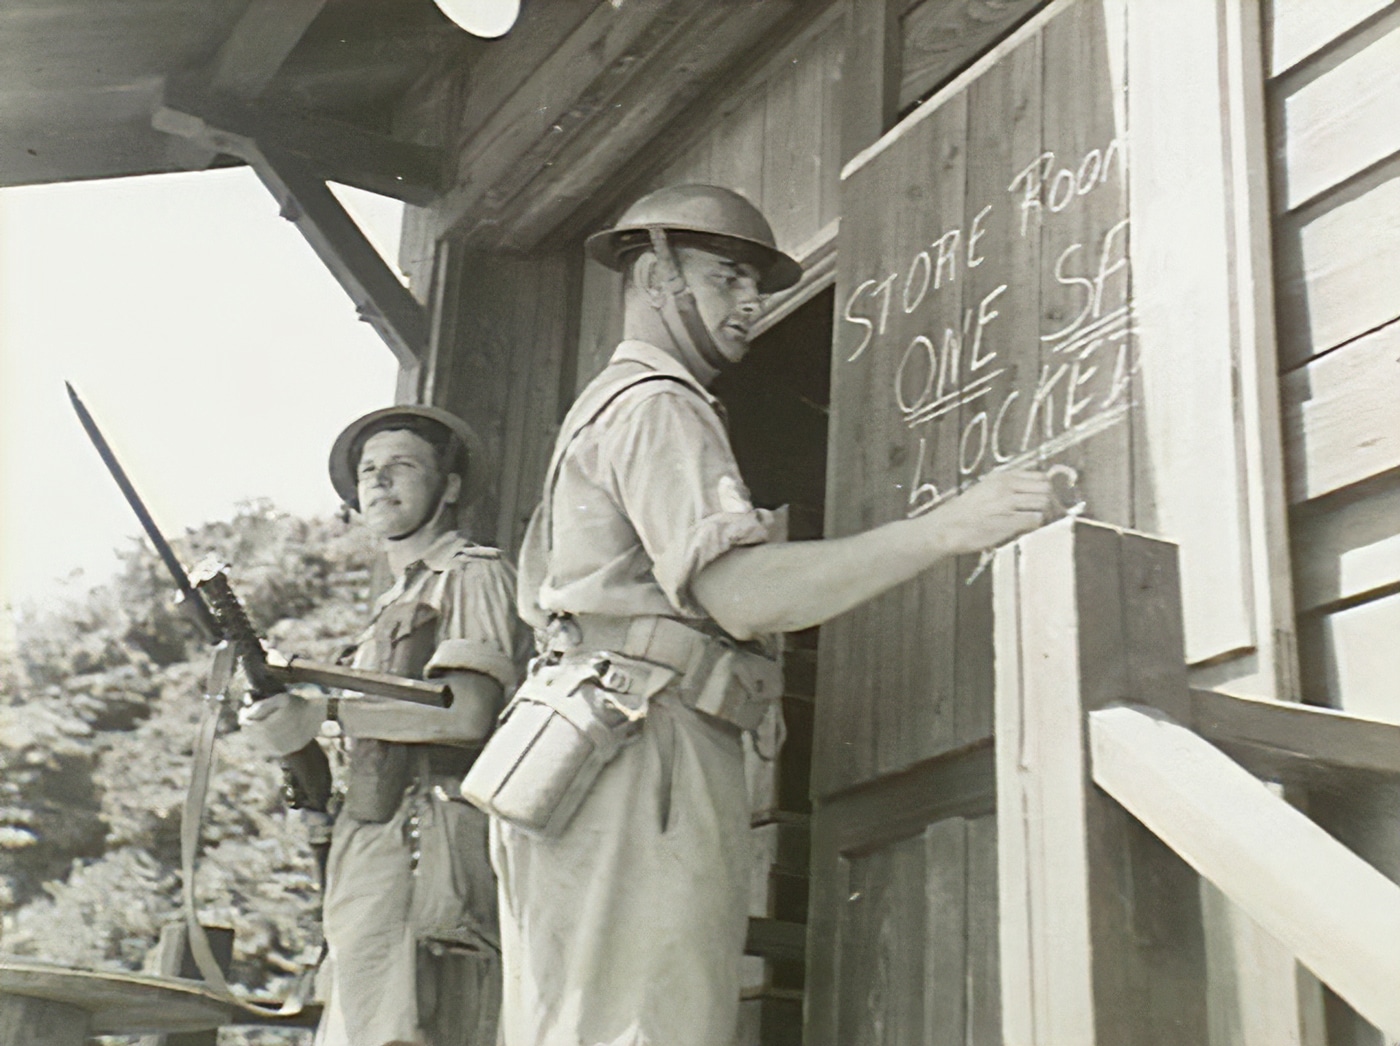 Australian troops search Japanese military base at the end of World War II